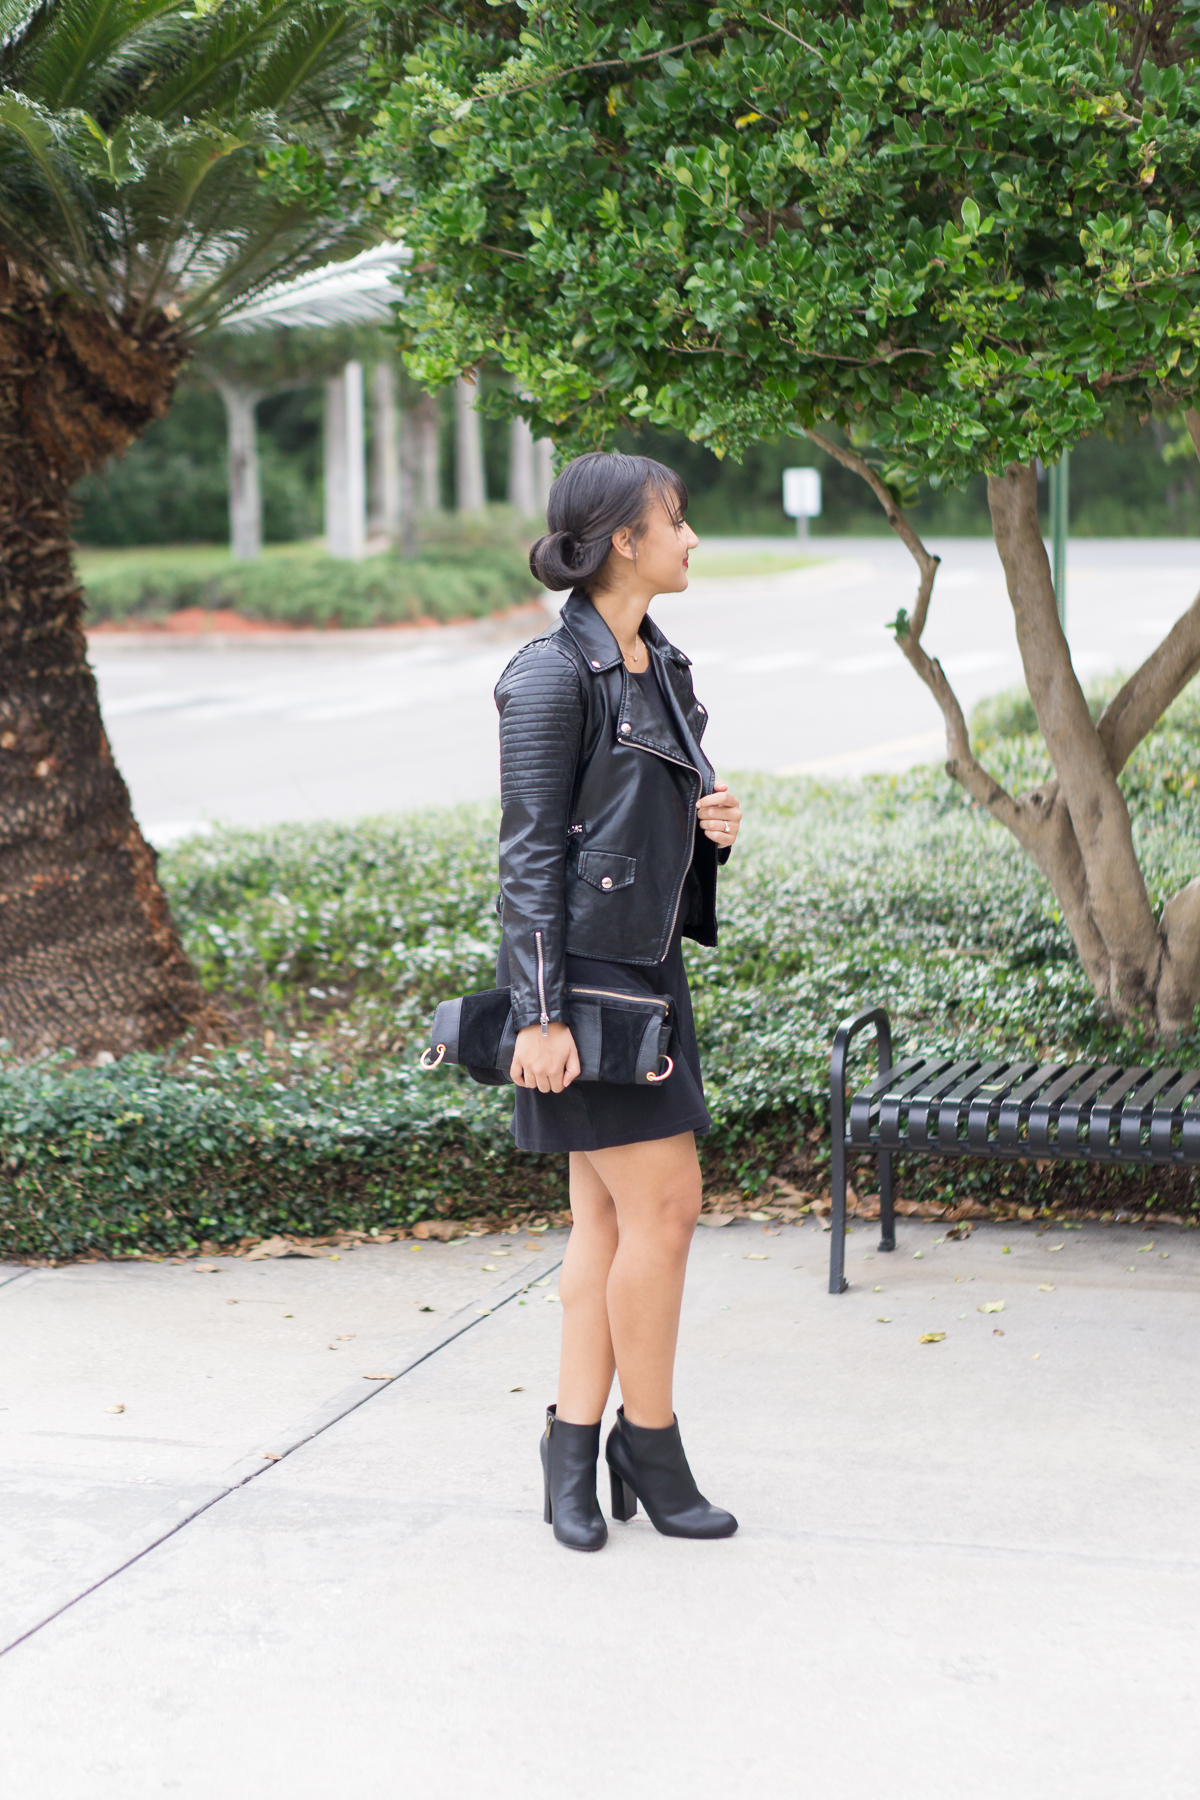 Leather Jackets for Fall in Florida- Monique McHugh Blog